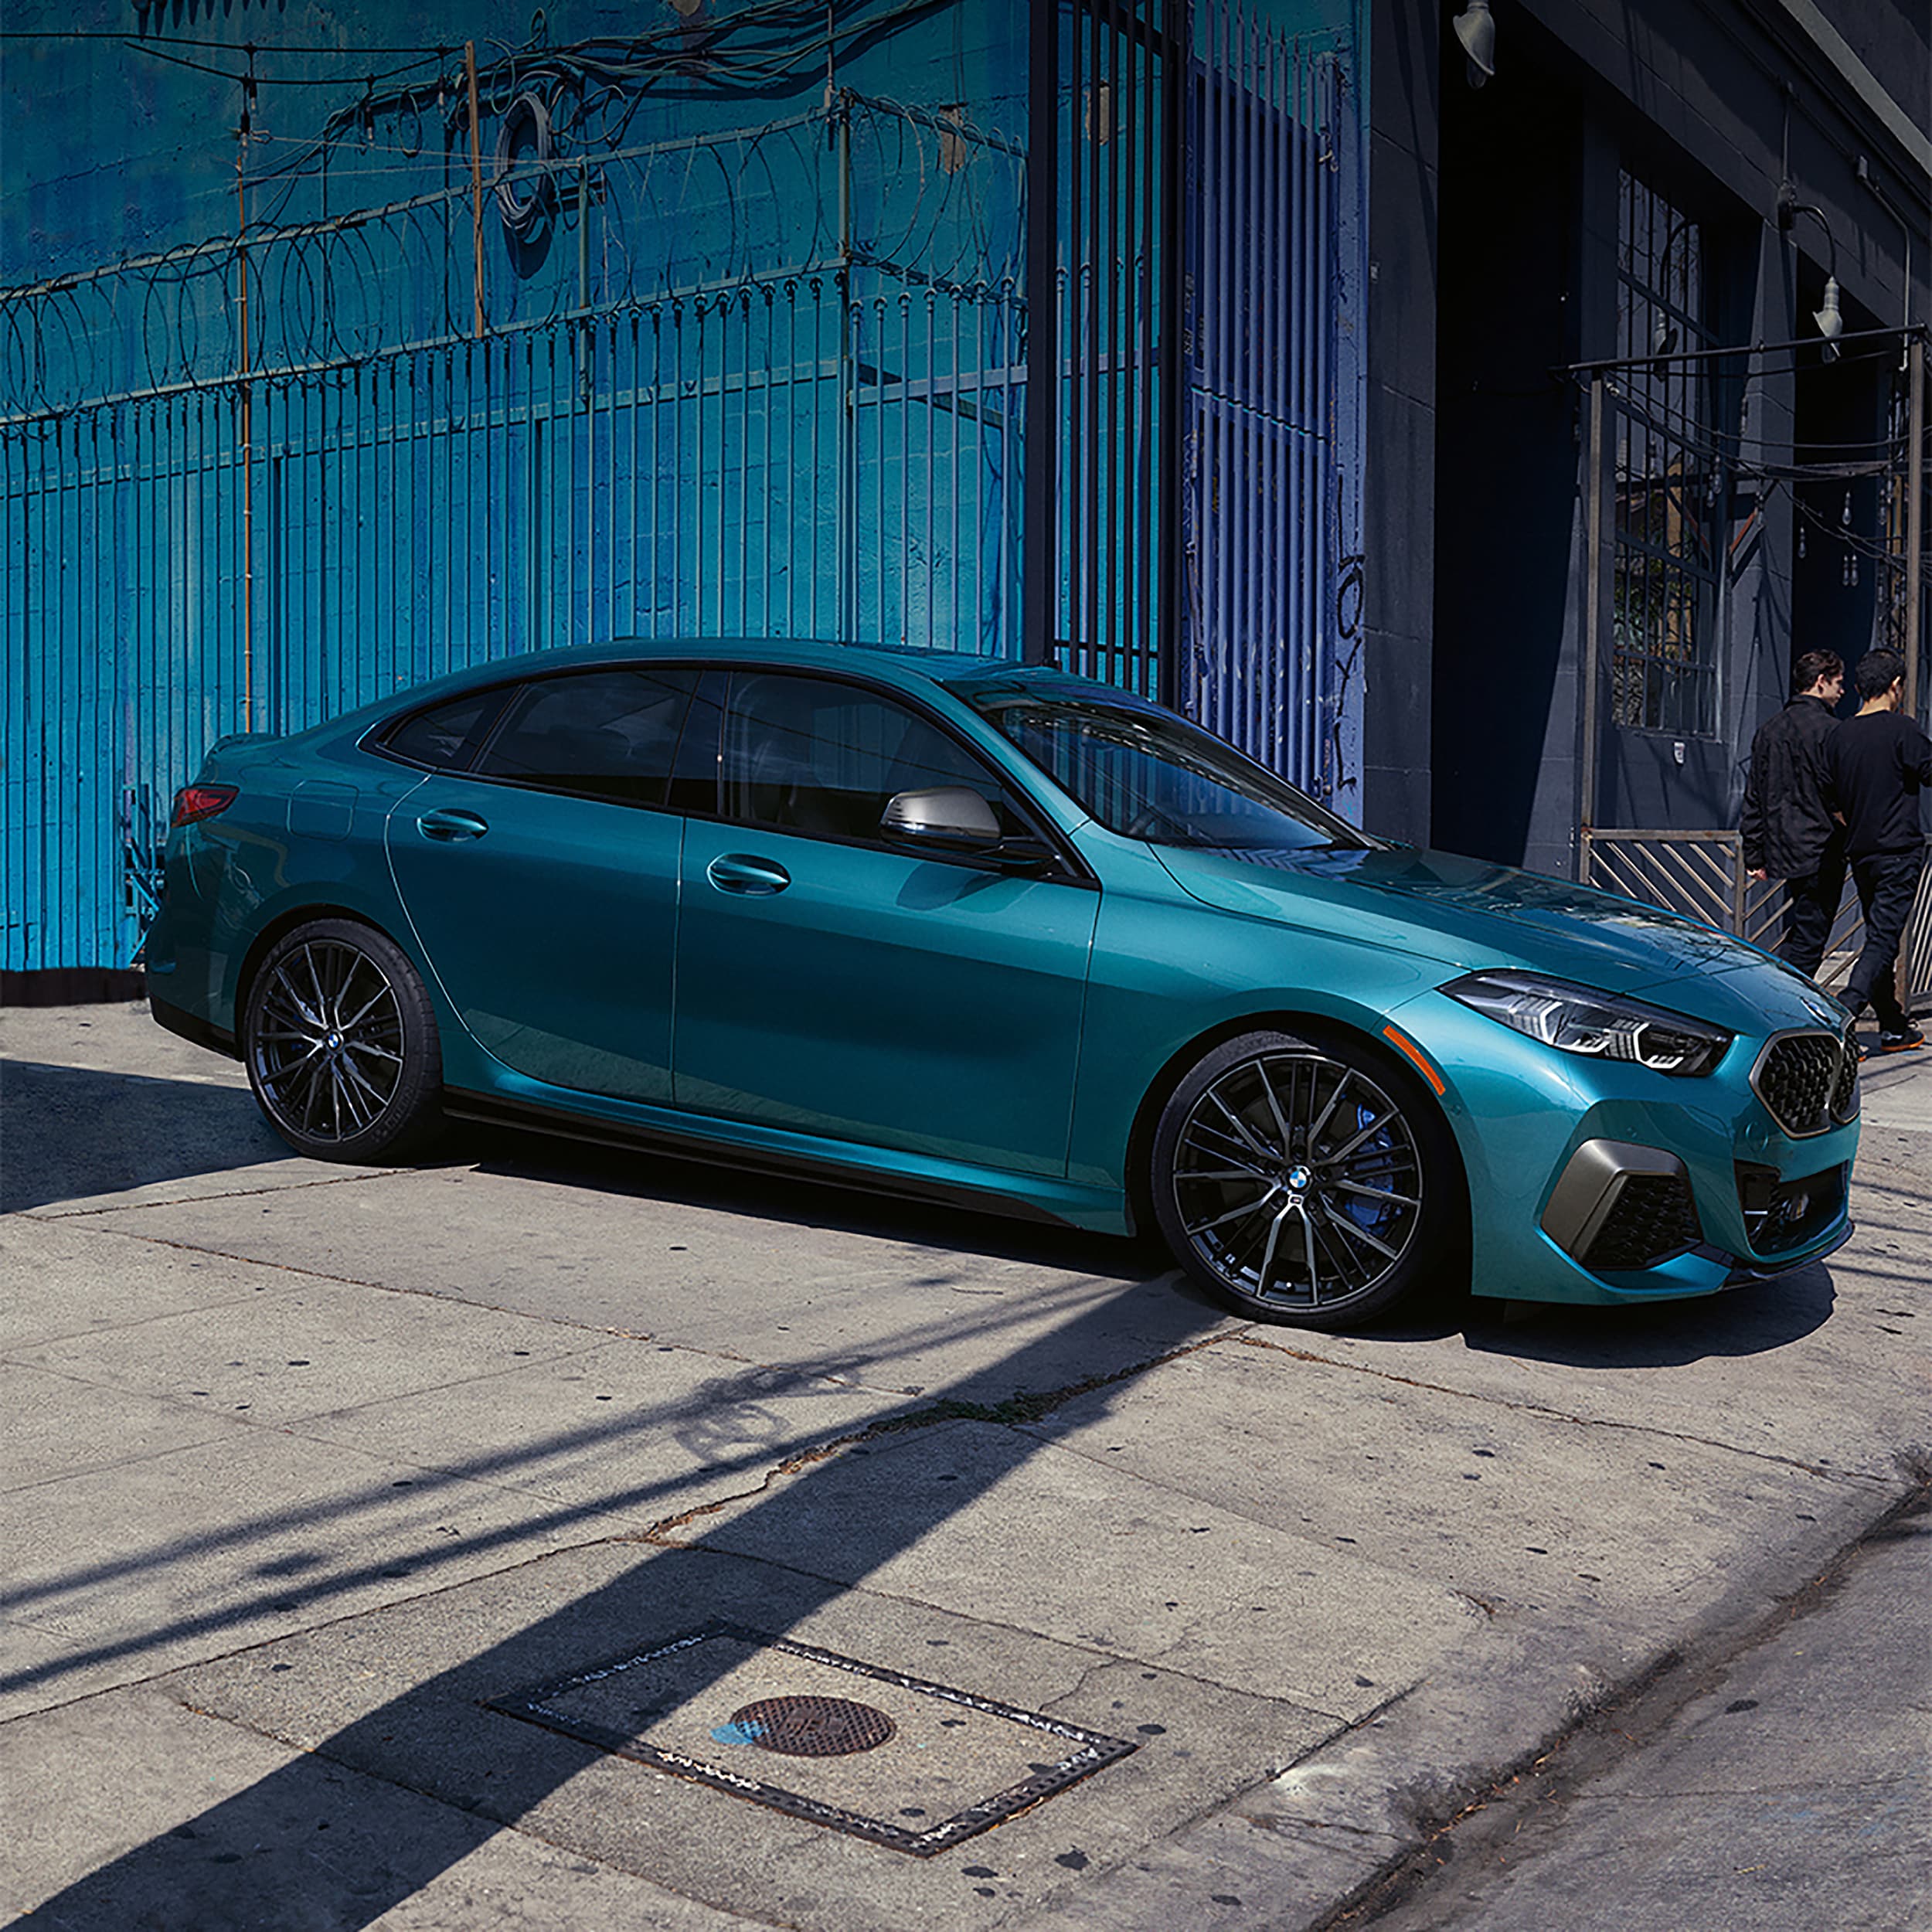 Don't Settle For Less: The BMW 2-Series Gran Coupe Has it All and More.